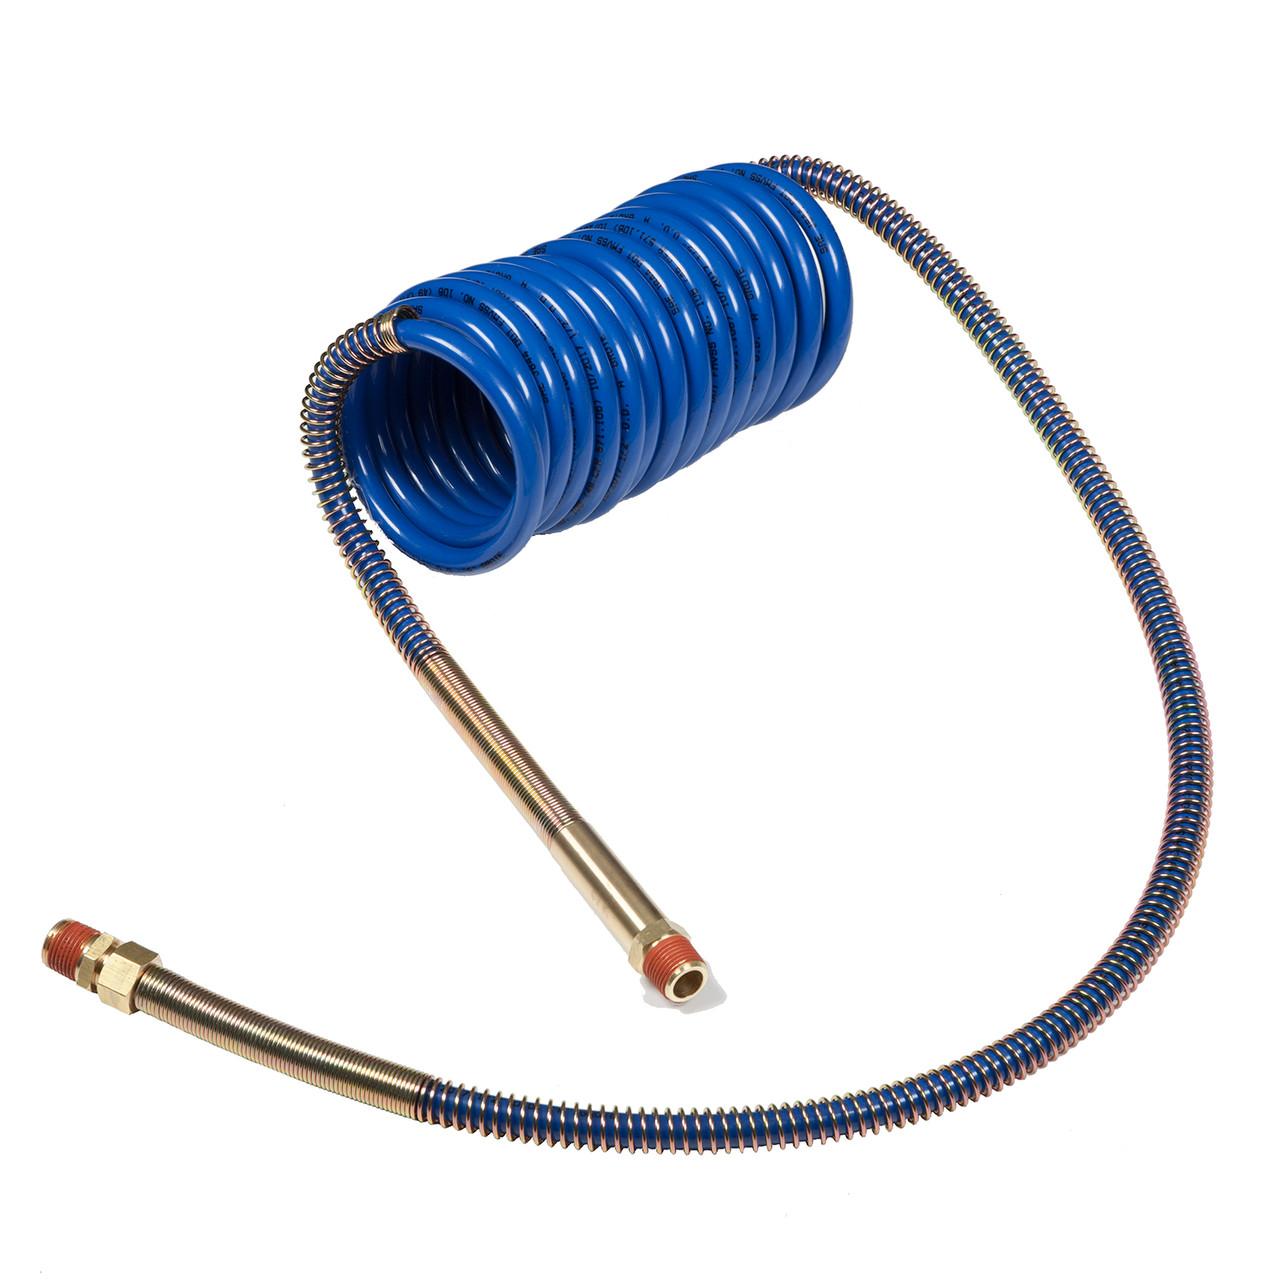 1/2" x 15' Blue Recoil Air Hose w/Brass Handle & Male NPT Fittings  81-0015-40HB